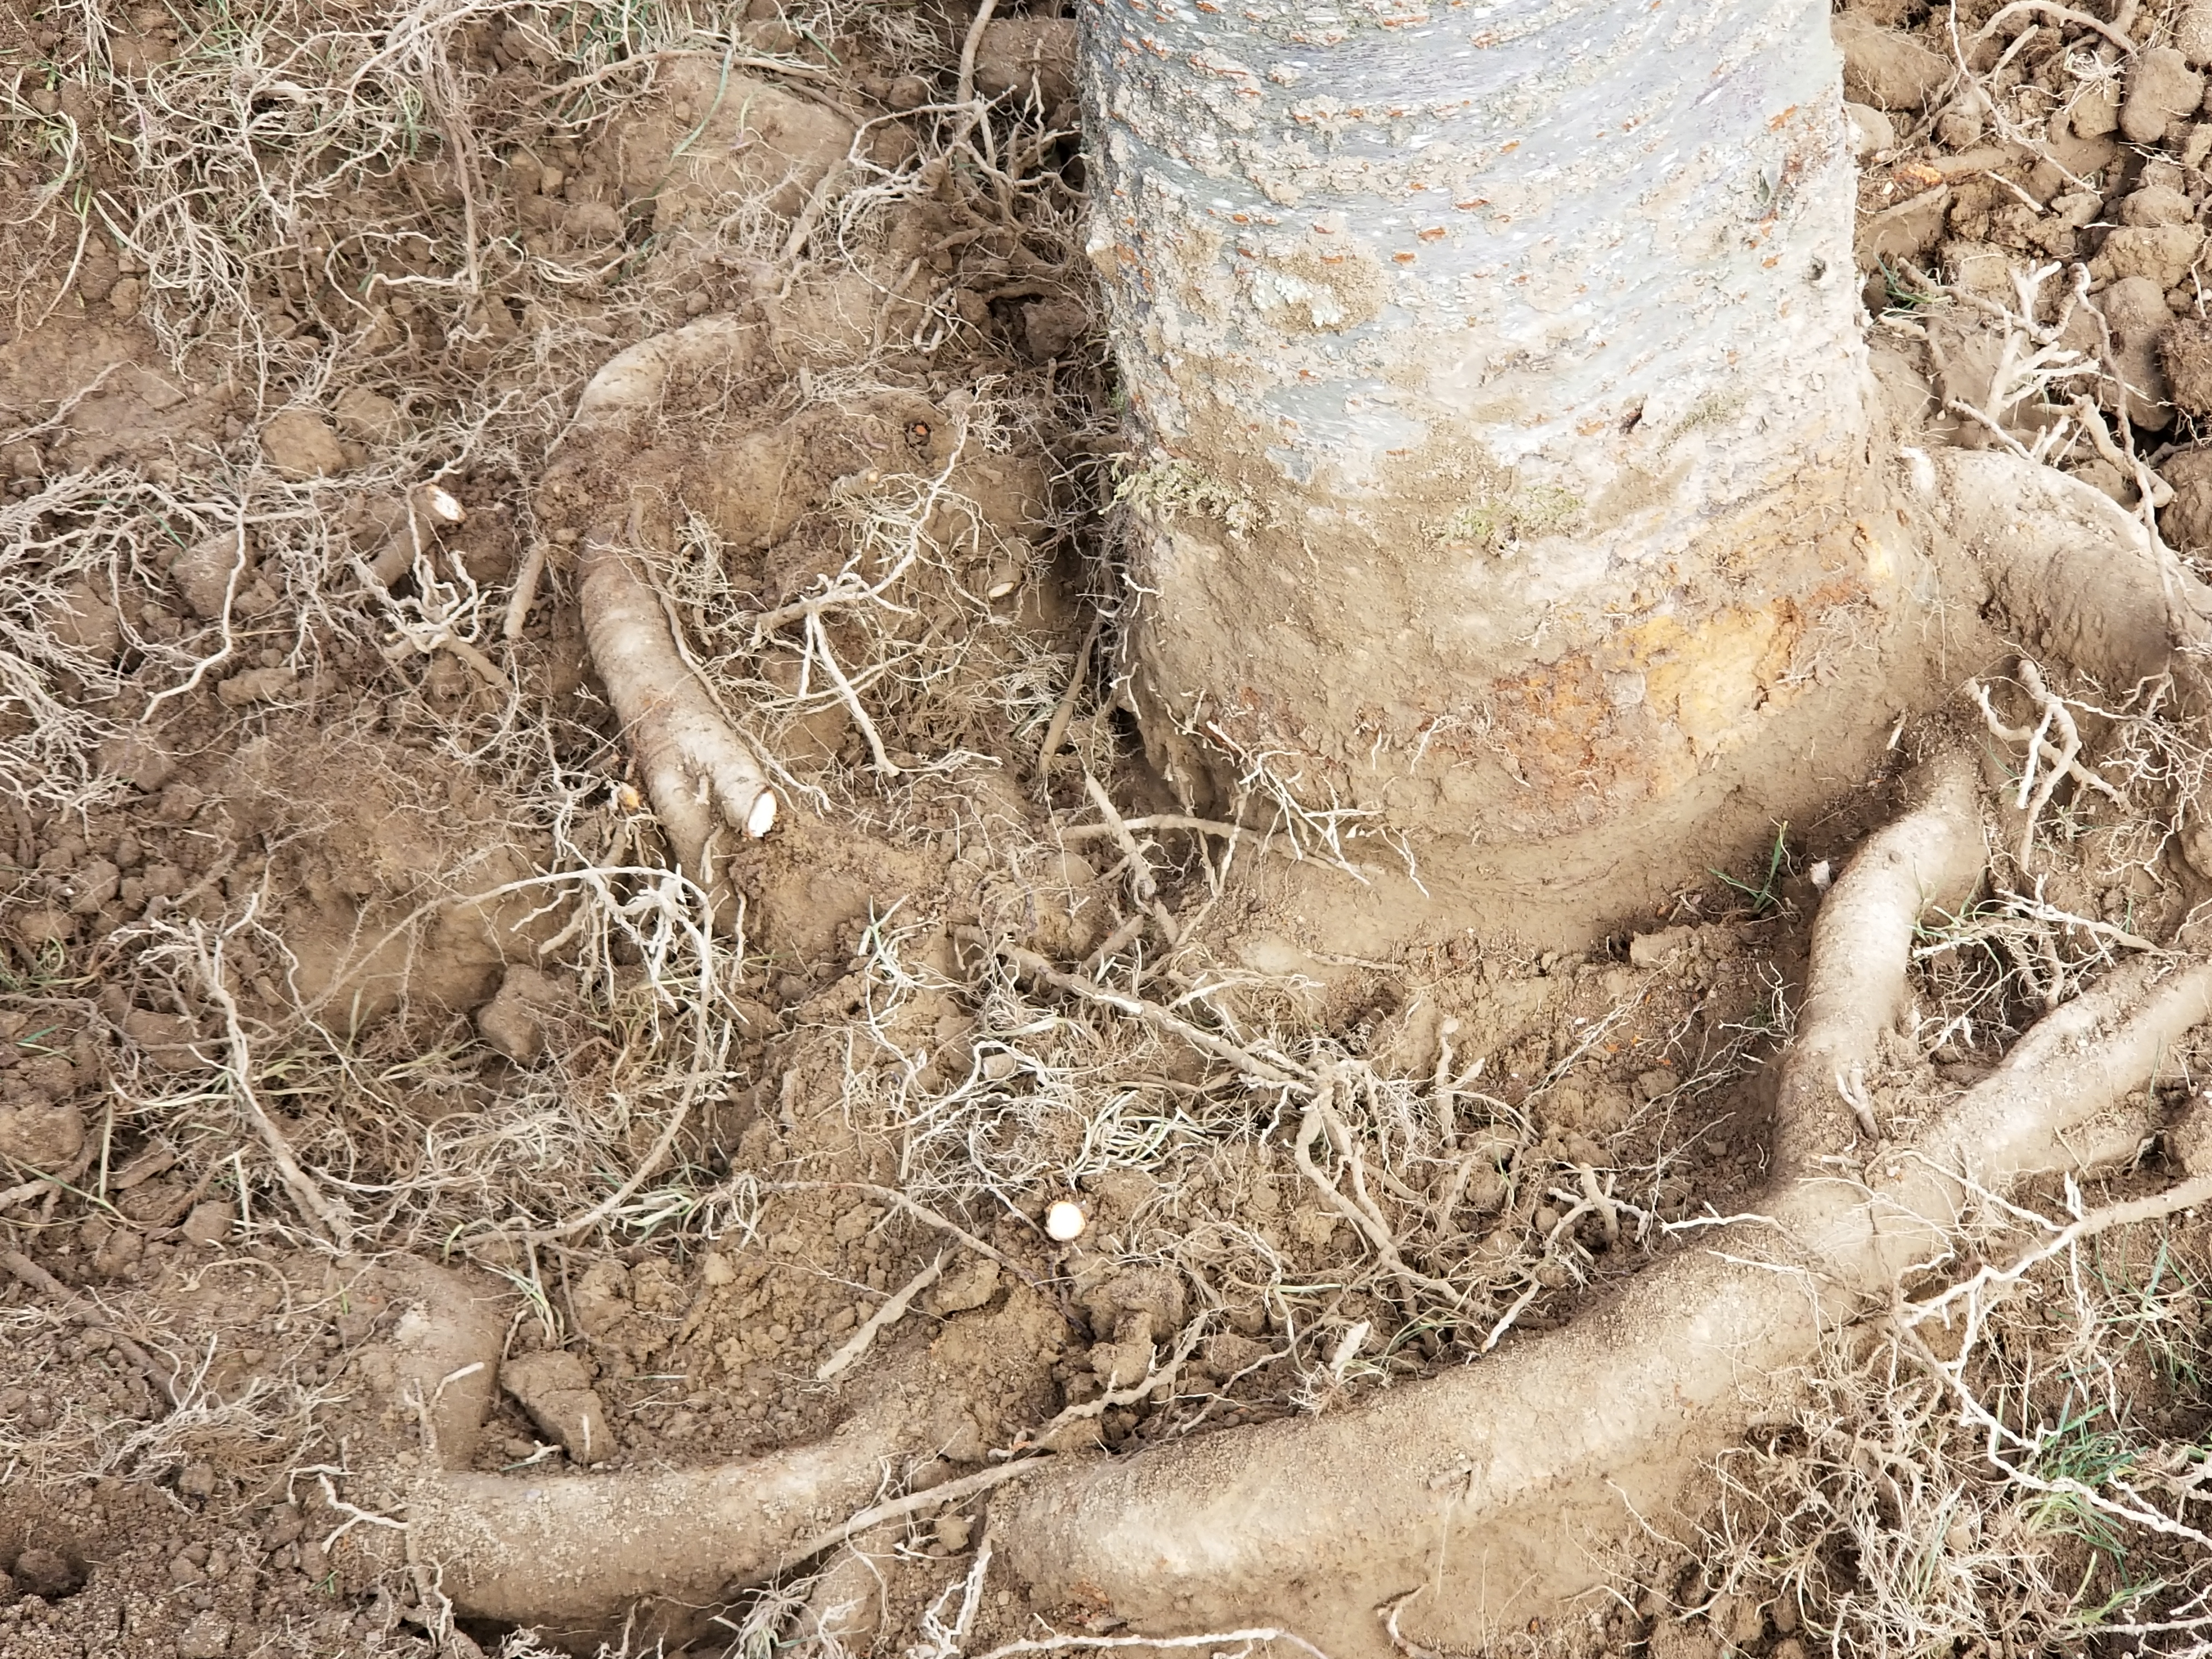 Girdling Roots – A Problem That Can Cause Tree Death